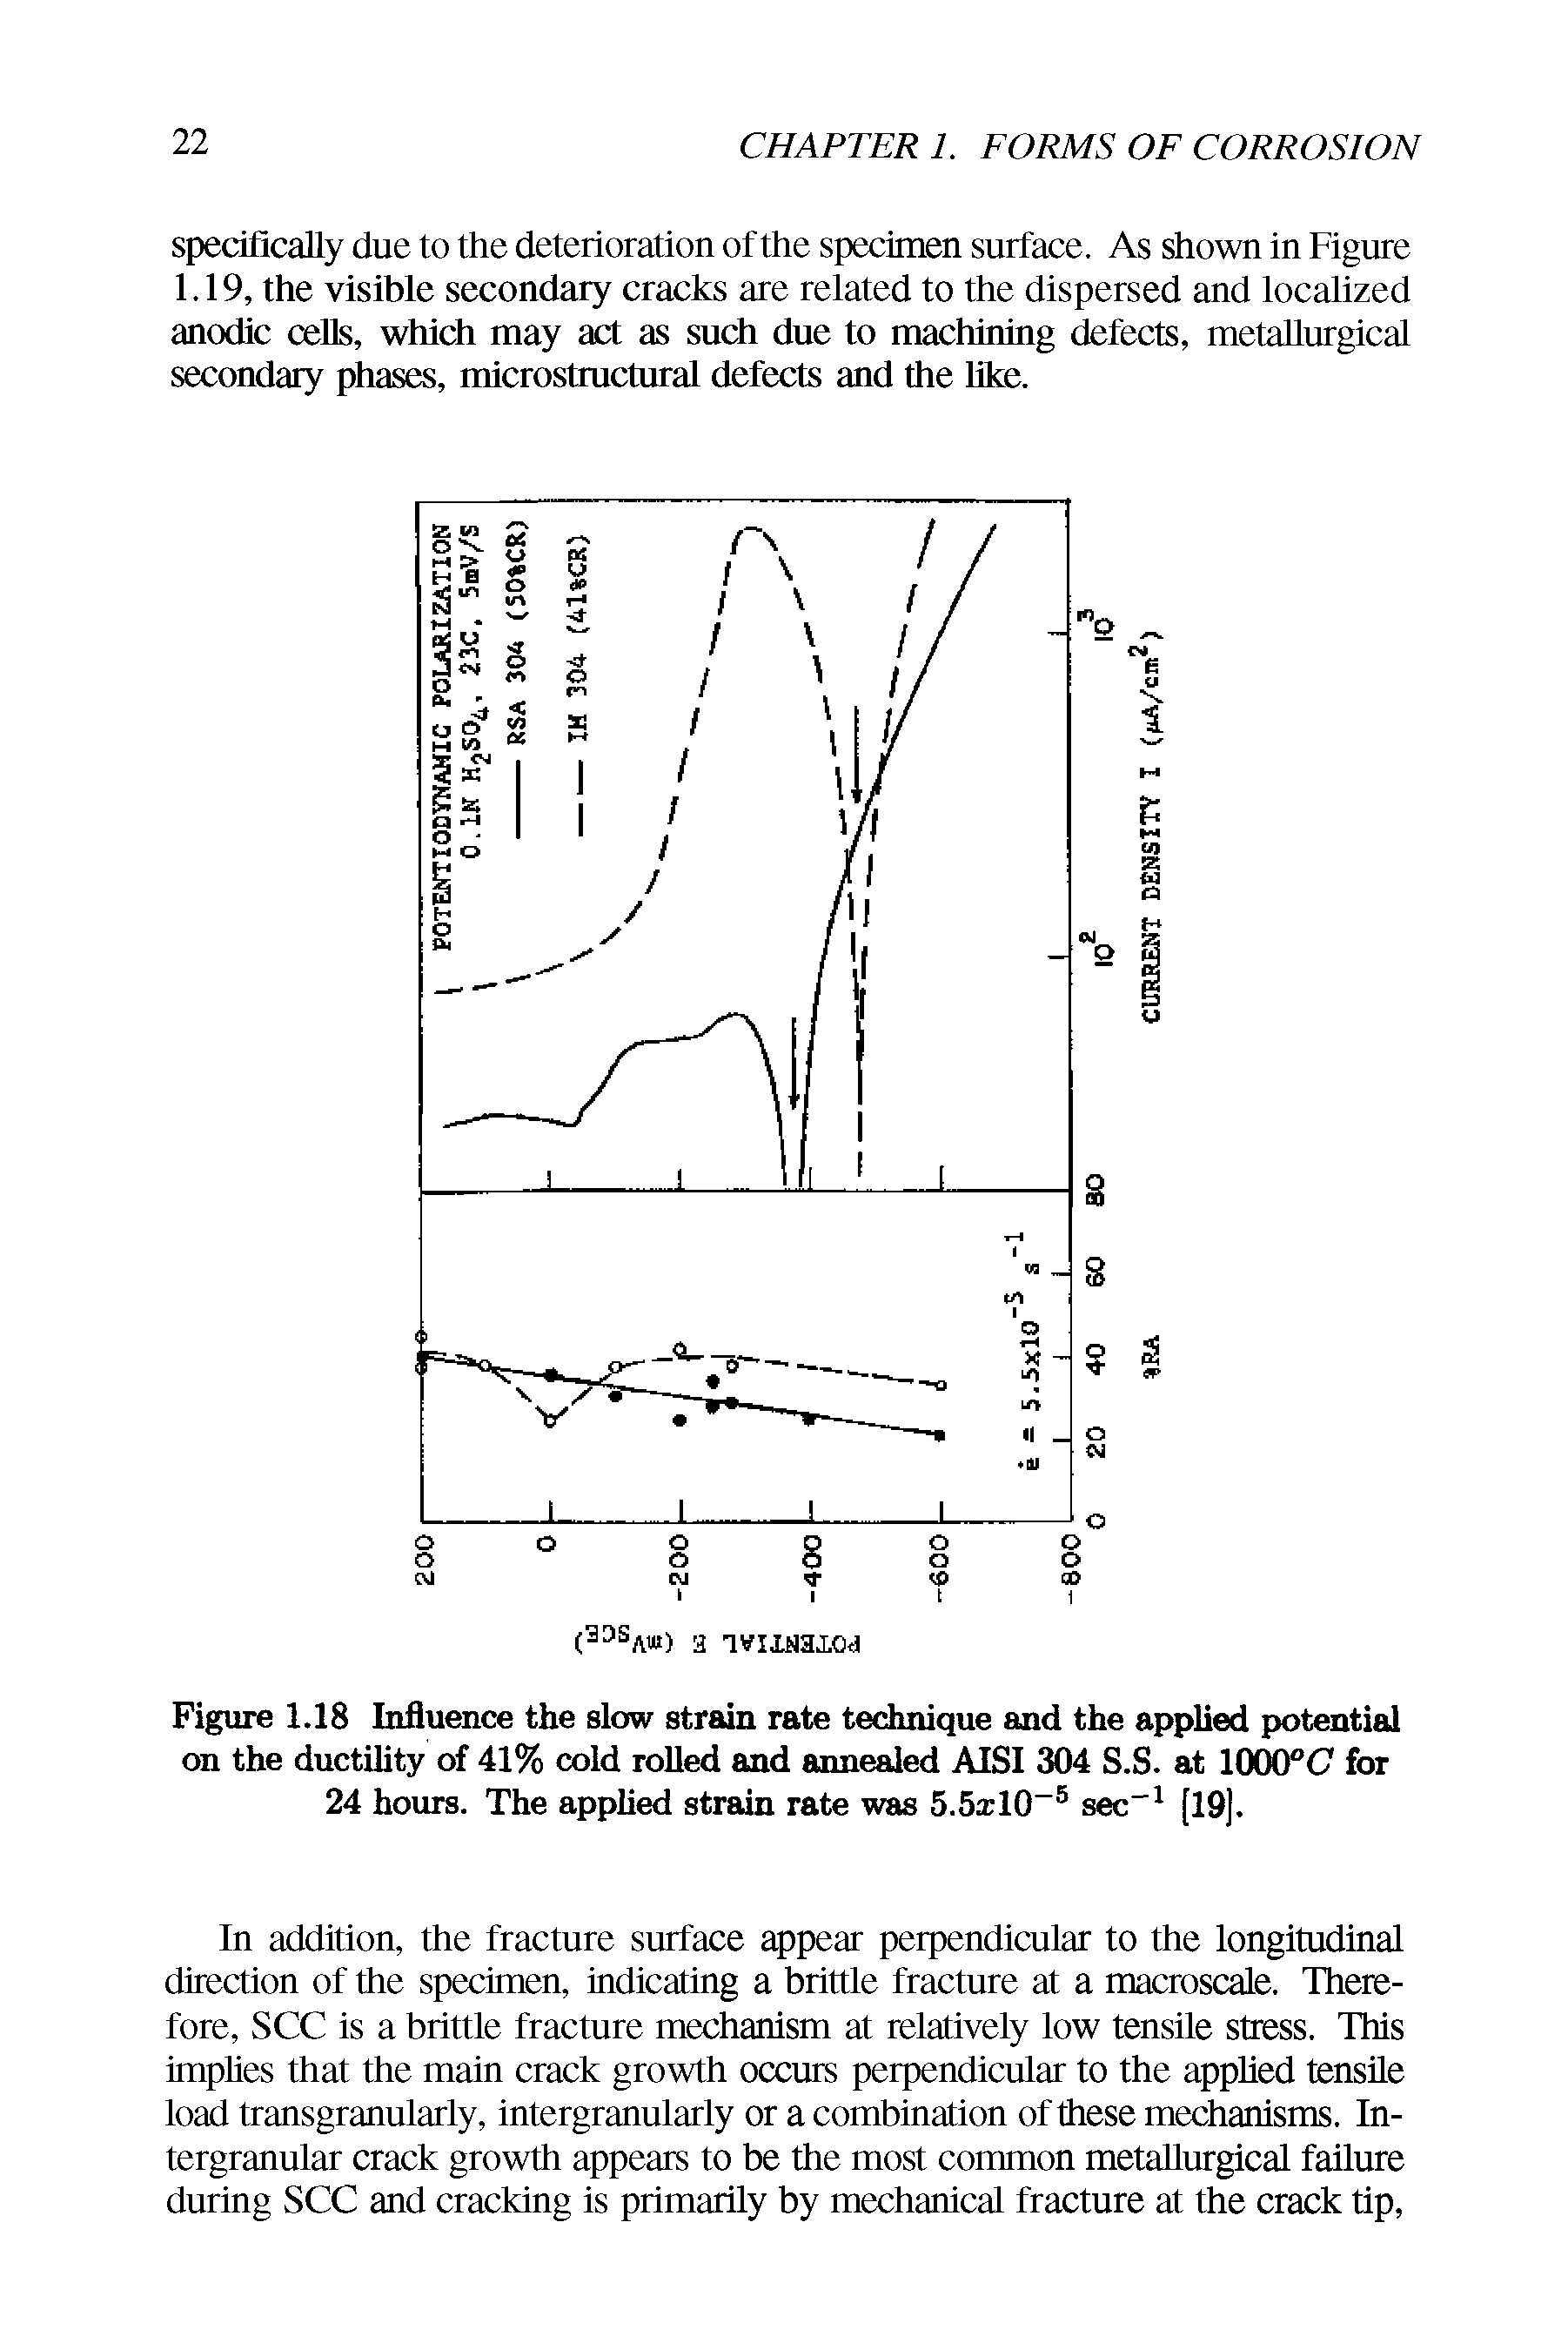 Figure 1.18 Influence the slow strain rate technique and the applied potential on the ductility of 41% cold rolled and annealed AISI 304 S.S. at 1000 (7 for 24 hours. The applied strain rate was 5.5a 10 sec" (19).